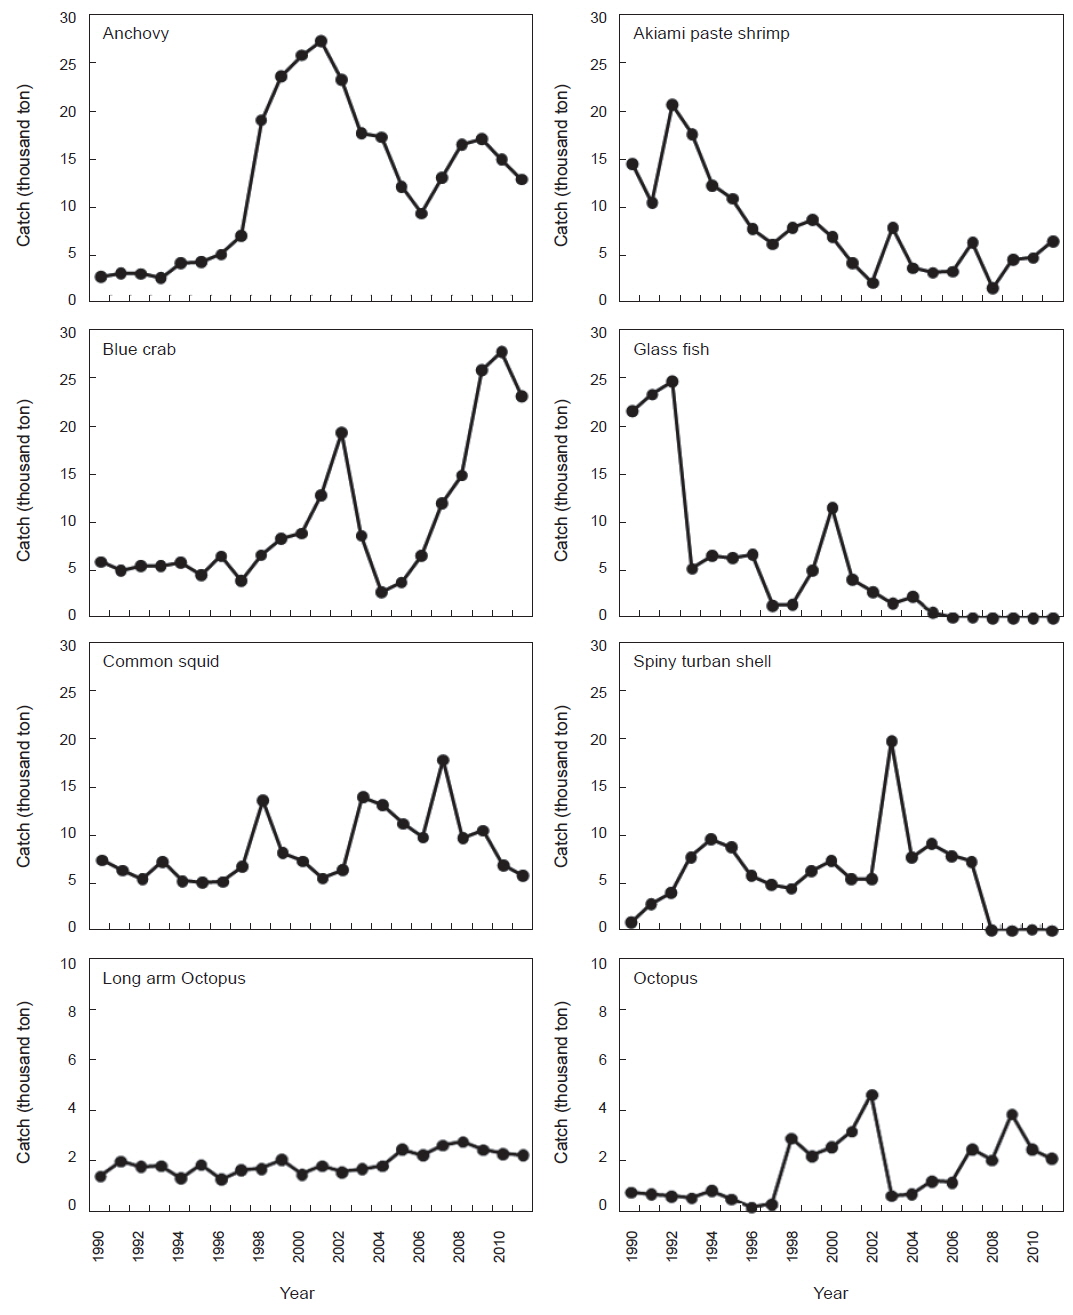 Variations in catch by species caught by coastal fisheries in the Yellow Sea from 1990 to 2011.